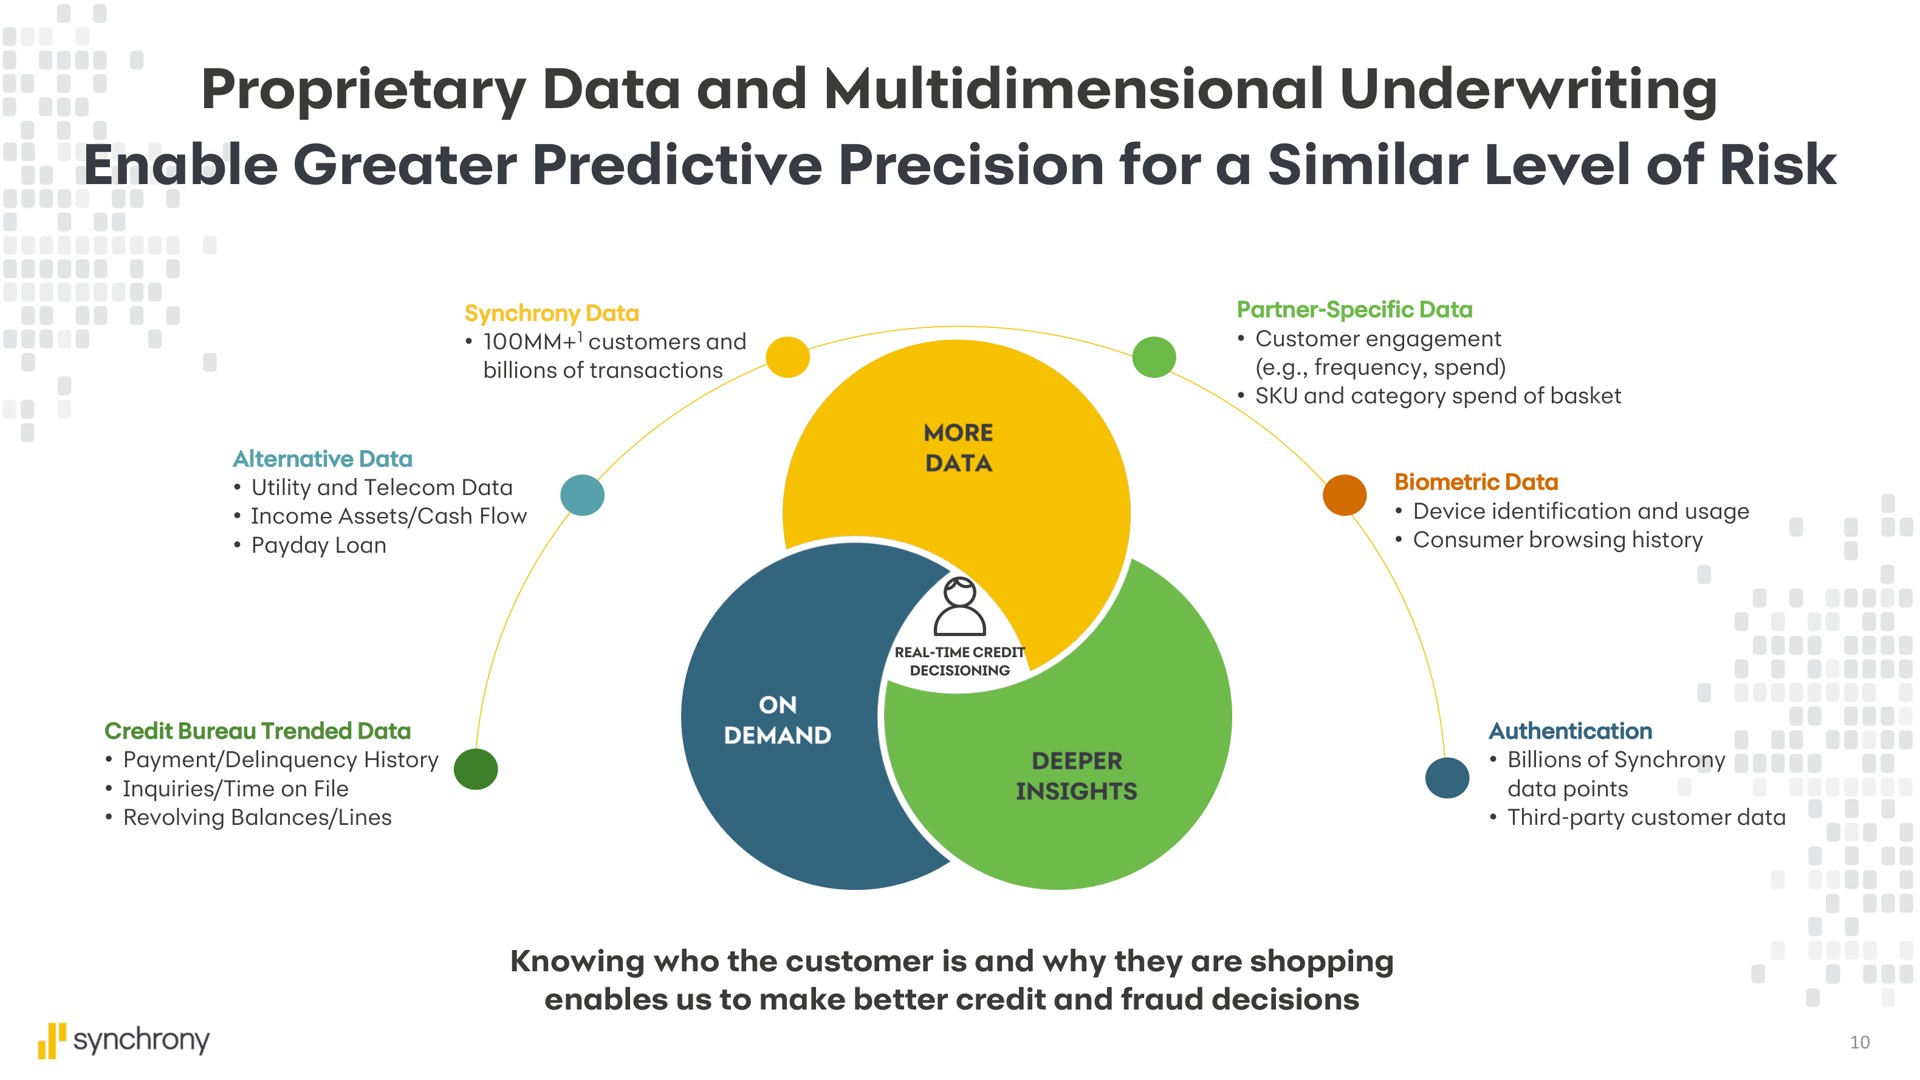 proprietary data and multidimensional underwriting enable greater predictive precision for a similar level of risk | Synchrony Financial